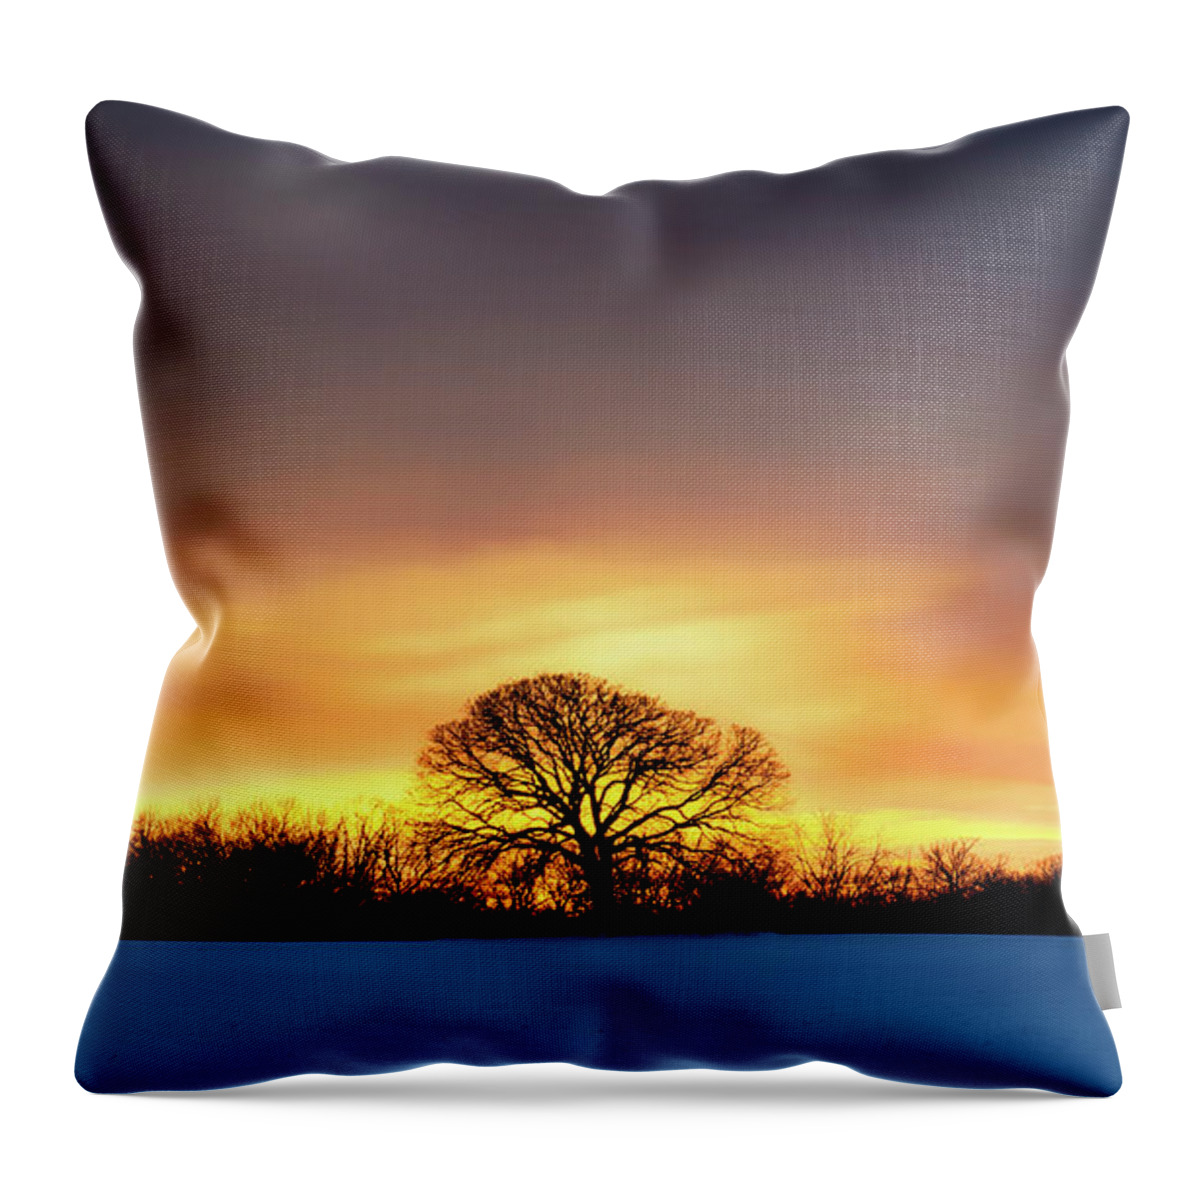  Throw Pillow featuring the photograph Fire In The Sky by Dan Hefle